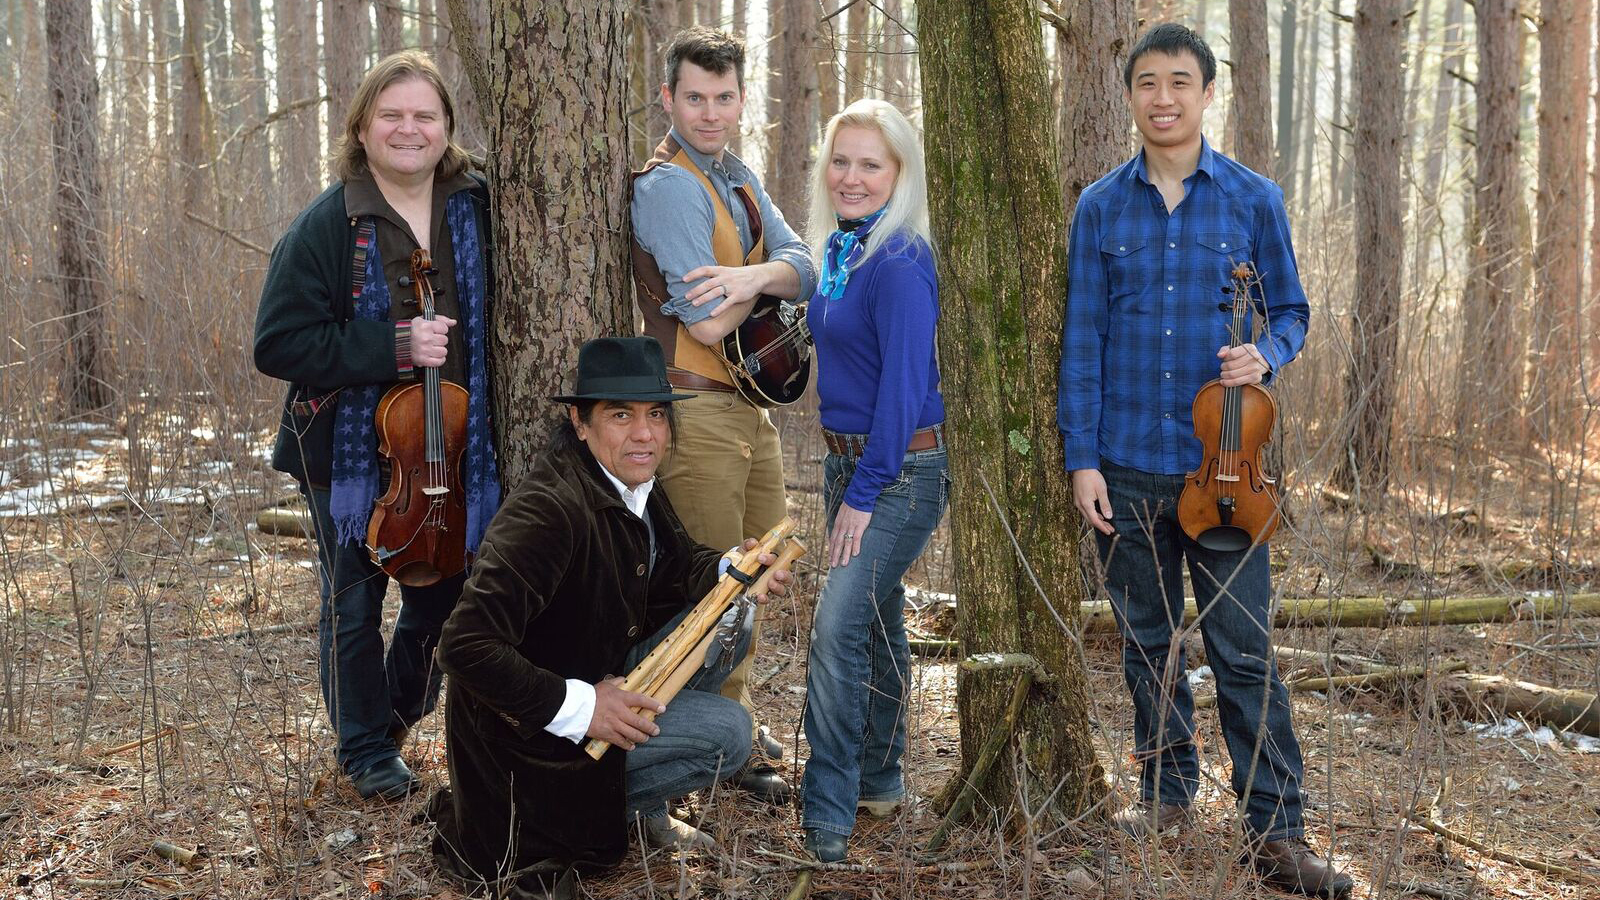 The group is pictured holding their instruments in a forest